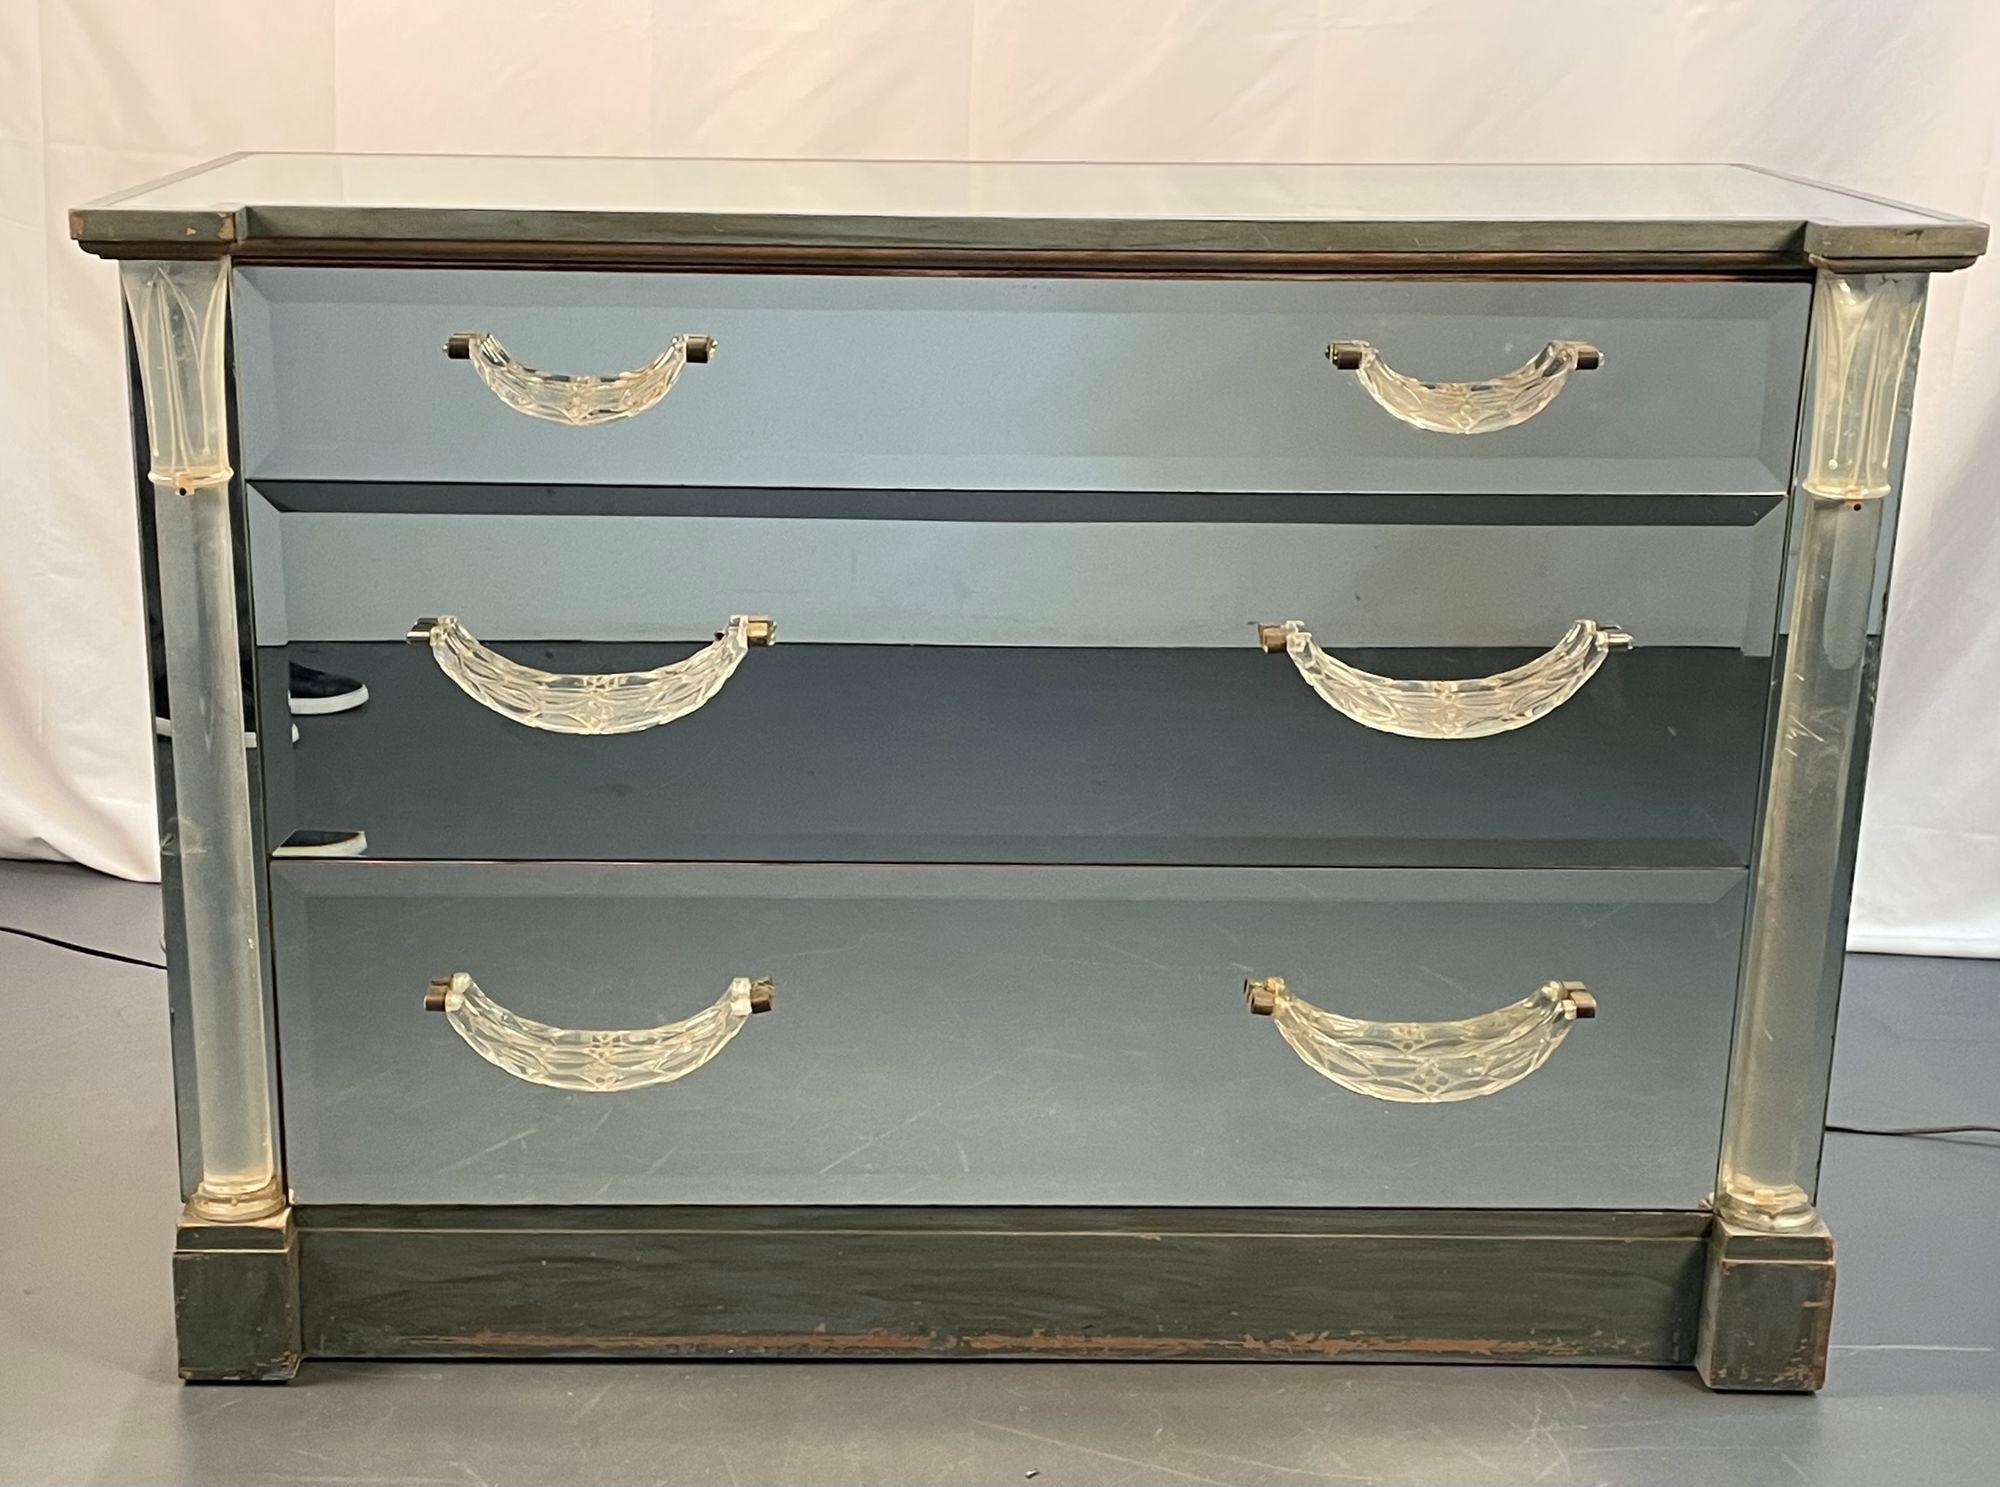 Grosfeld House, Mid-Century Modern, Glassics Series, Mirrored Cabinet, 1930s In Good Condition For Sale In Stamford, CT